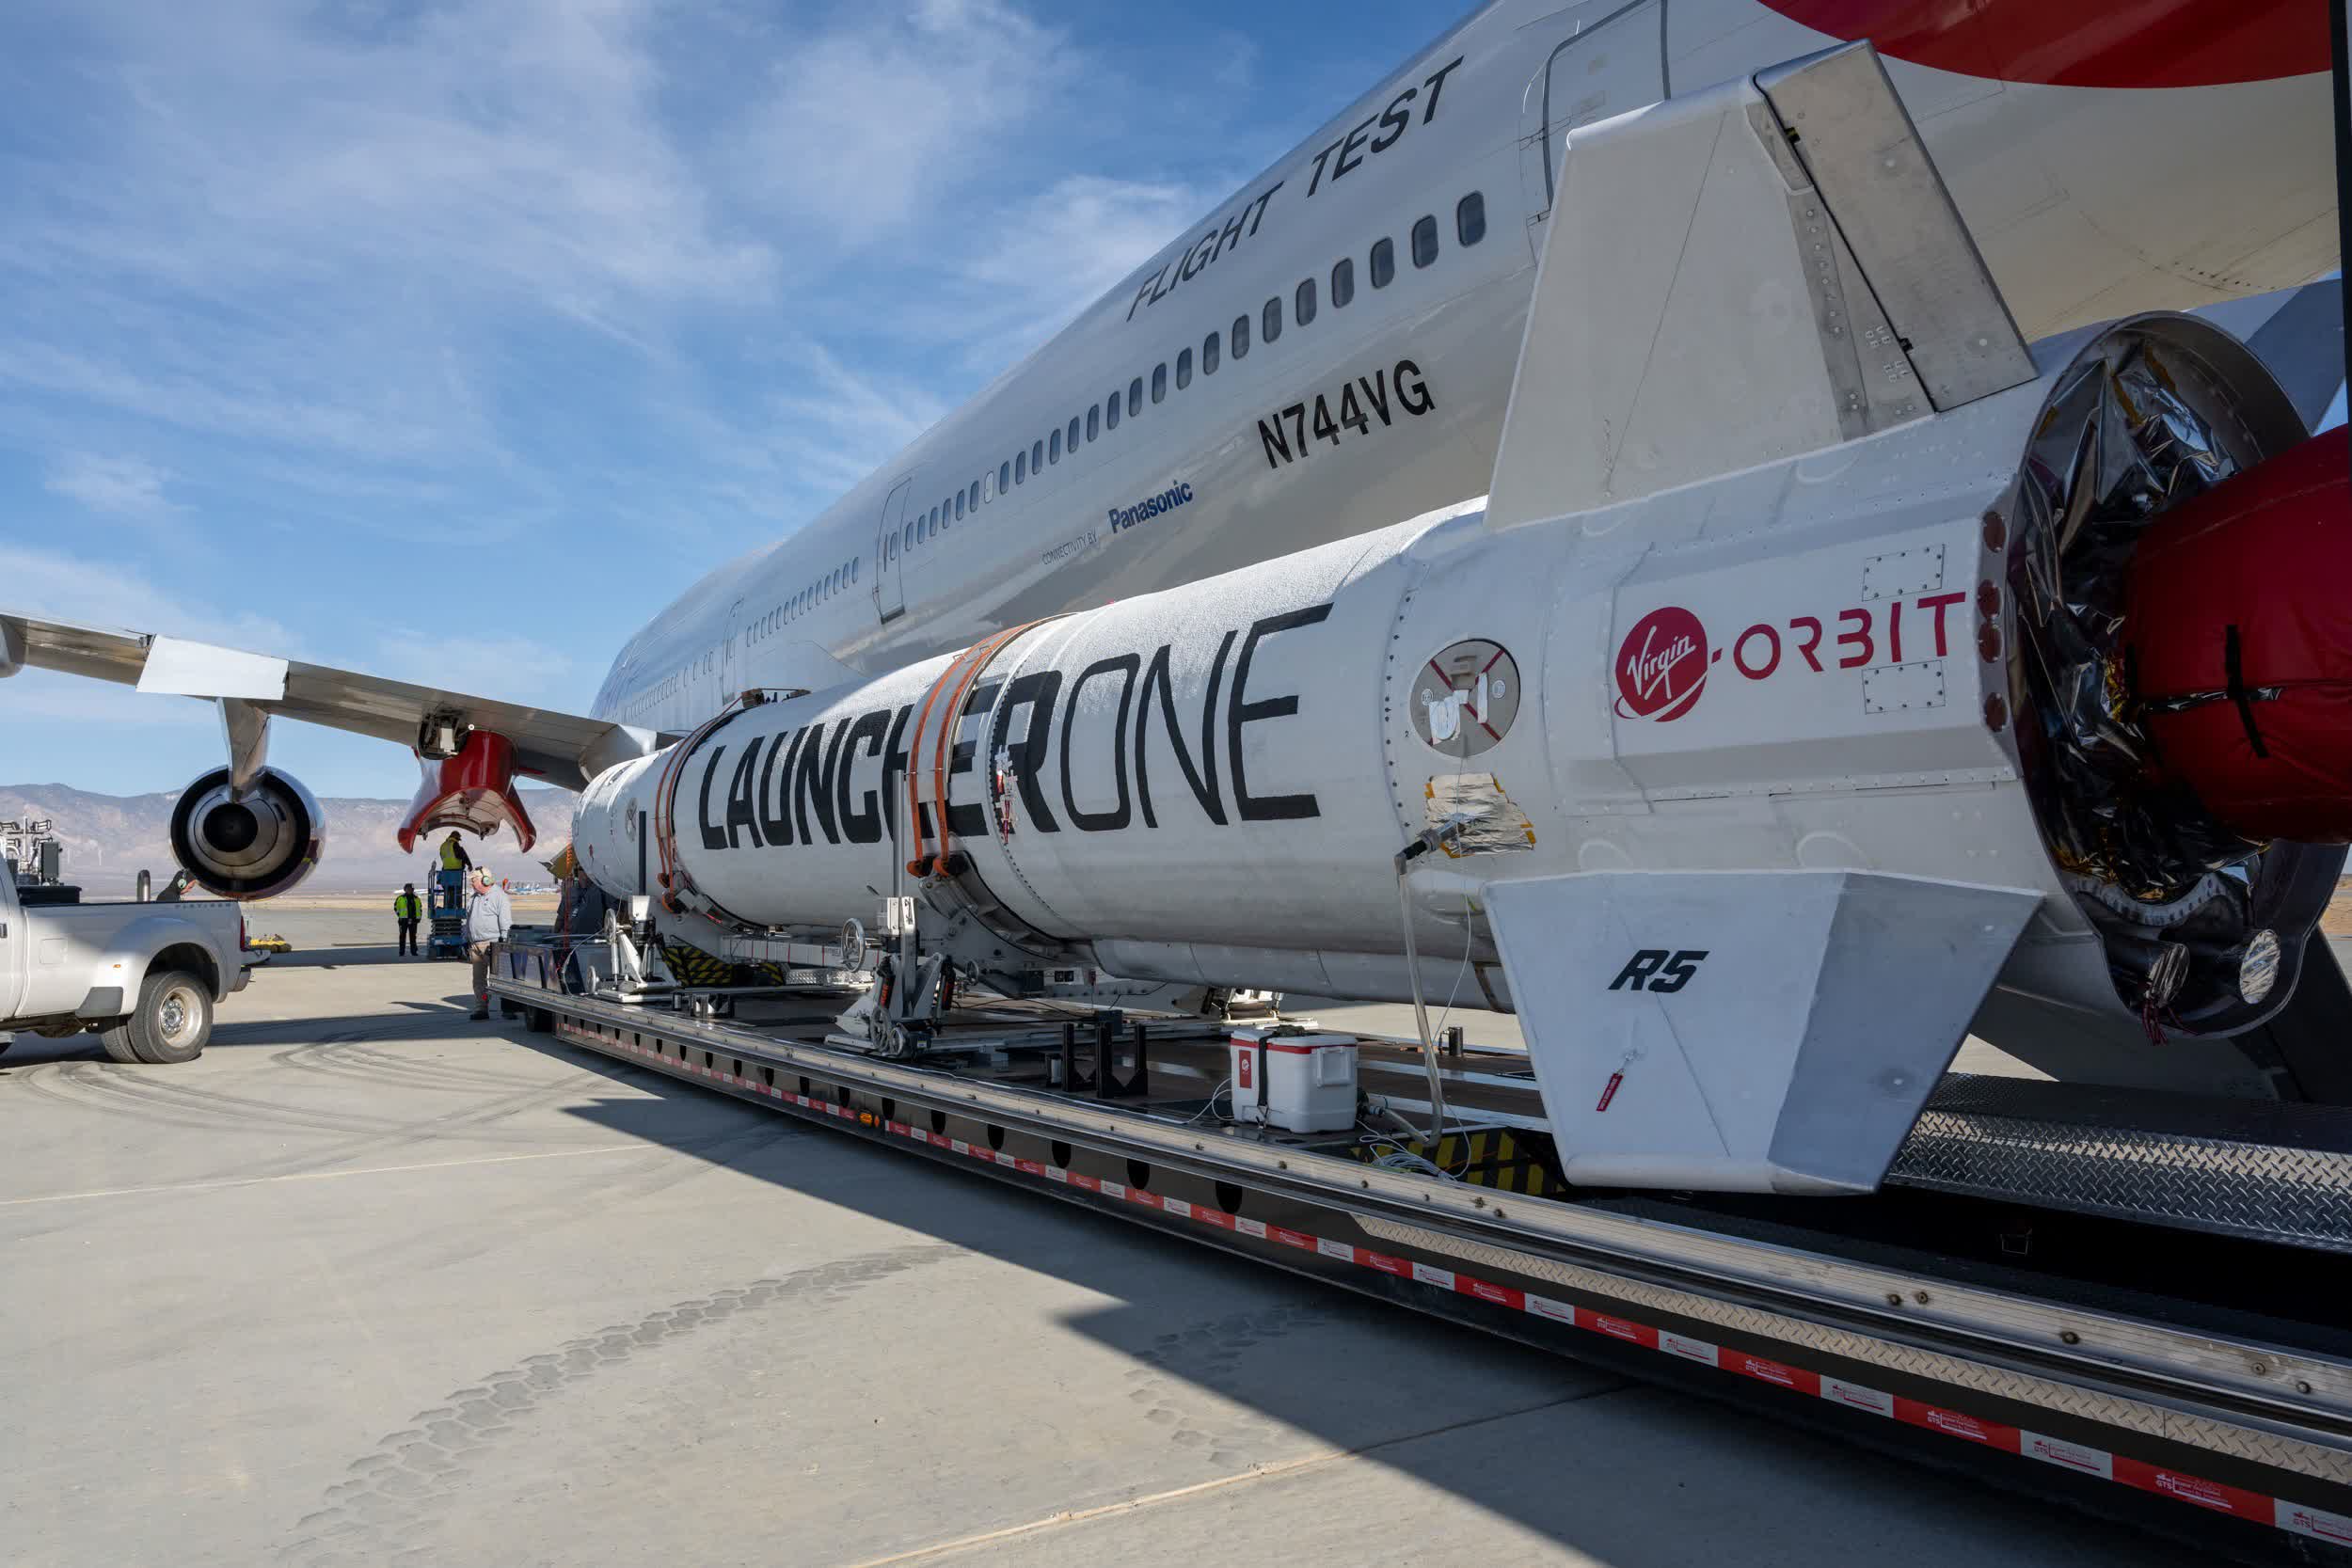 Virgin Orbit files for Chapter 11 protection in a last ditch effort to find a buyer